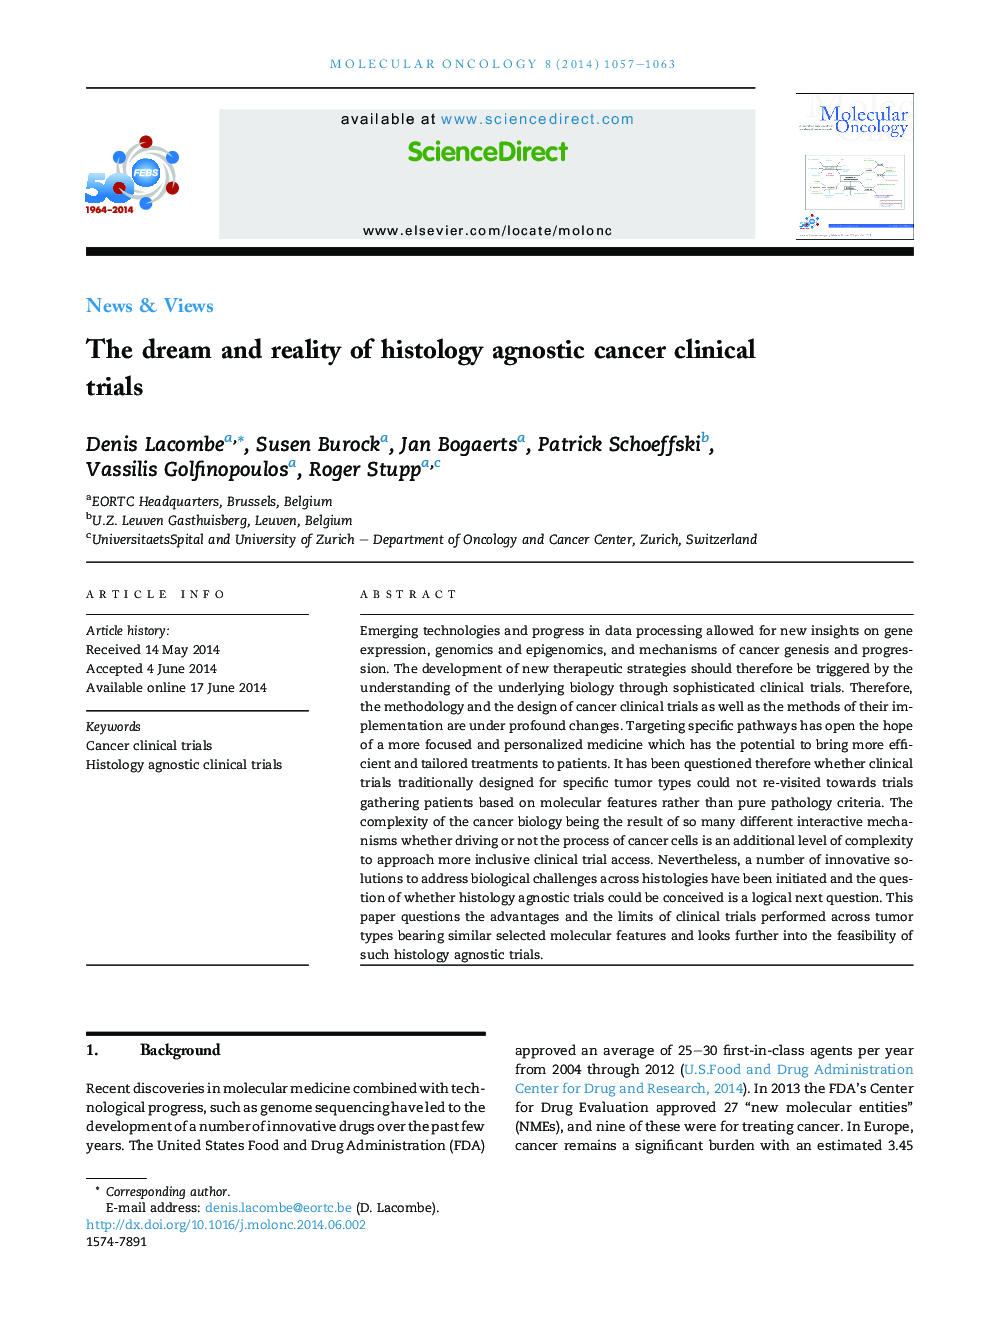 The dream and reality of histology agnostic cancer clinical trials